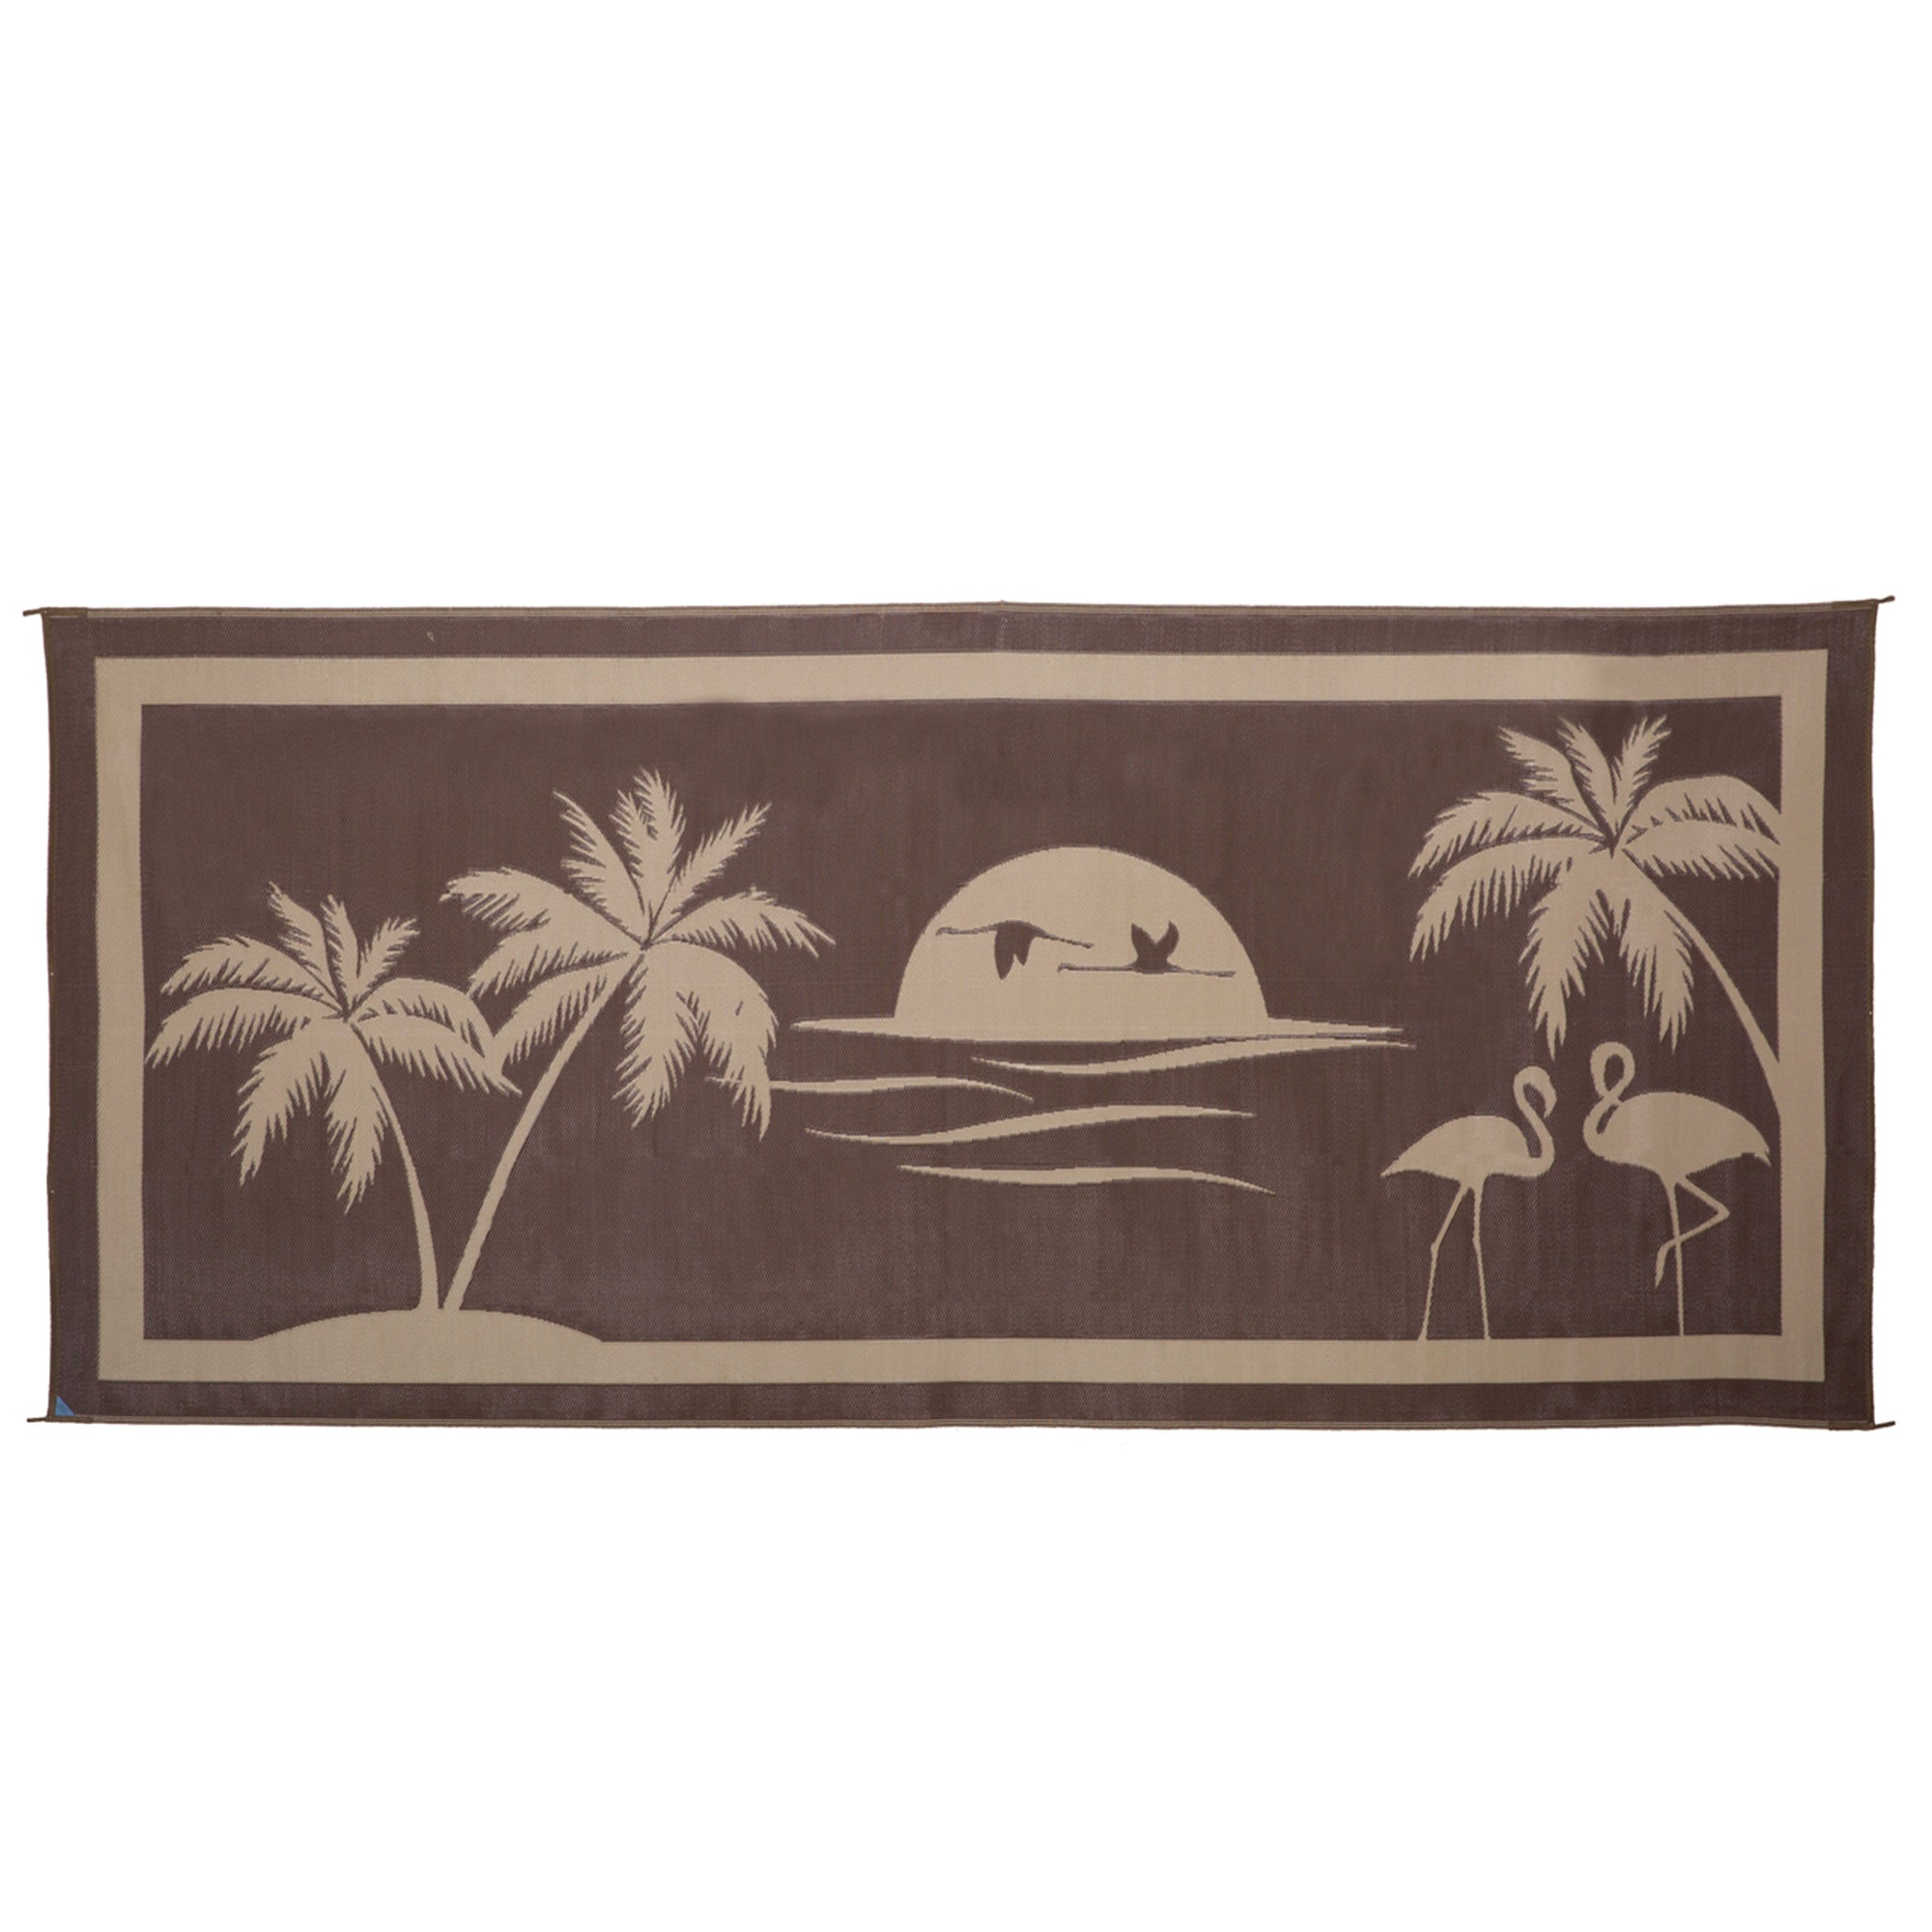 Ming's Mark TO8187 Stylish Camping Tropical Oasis Patio Mat - 8' x 18'', Brown/Beige (Reversible)